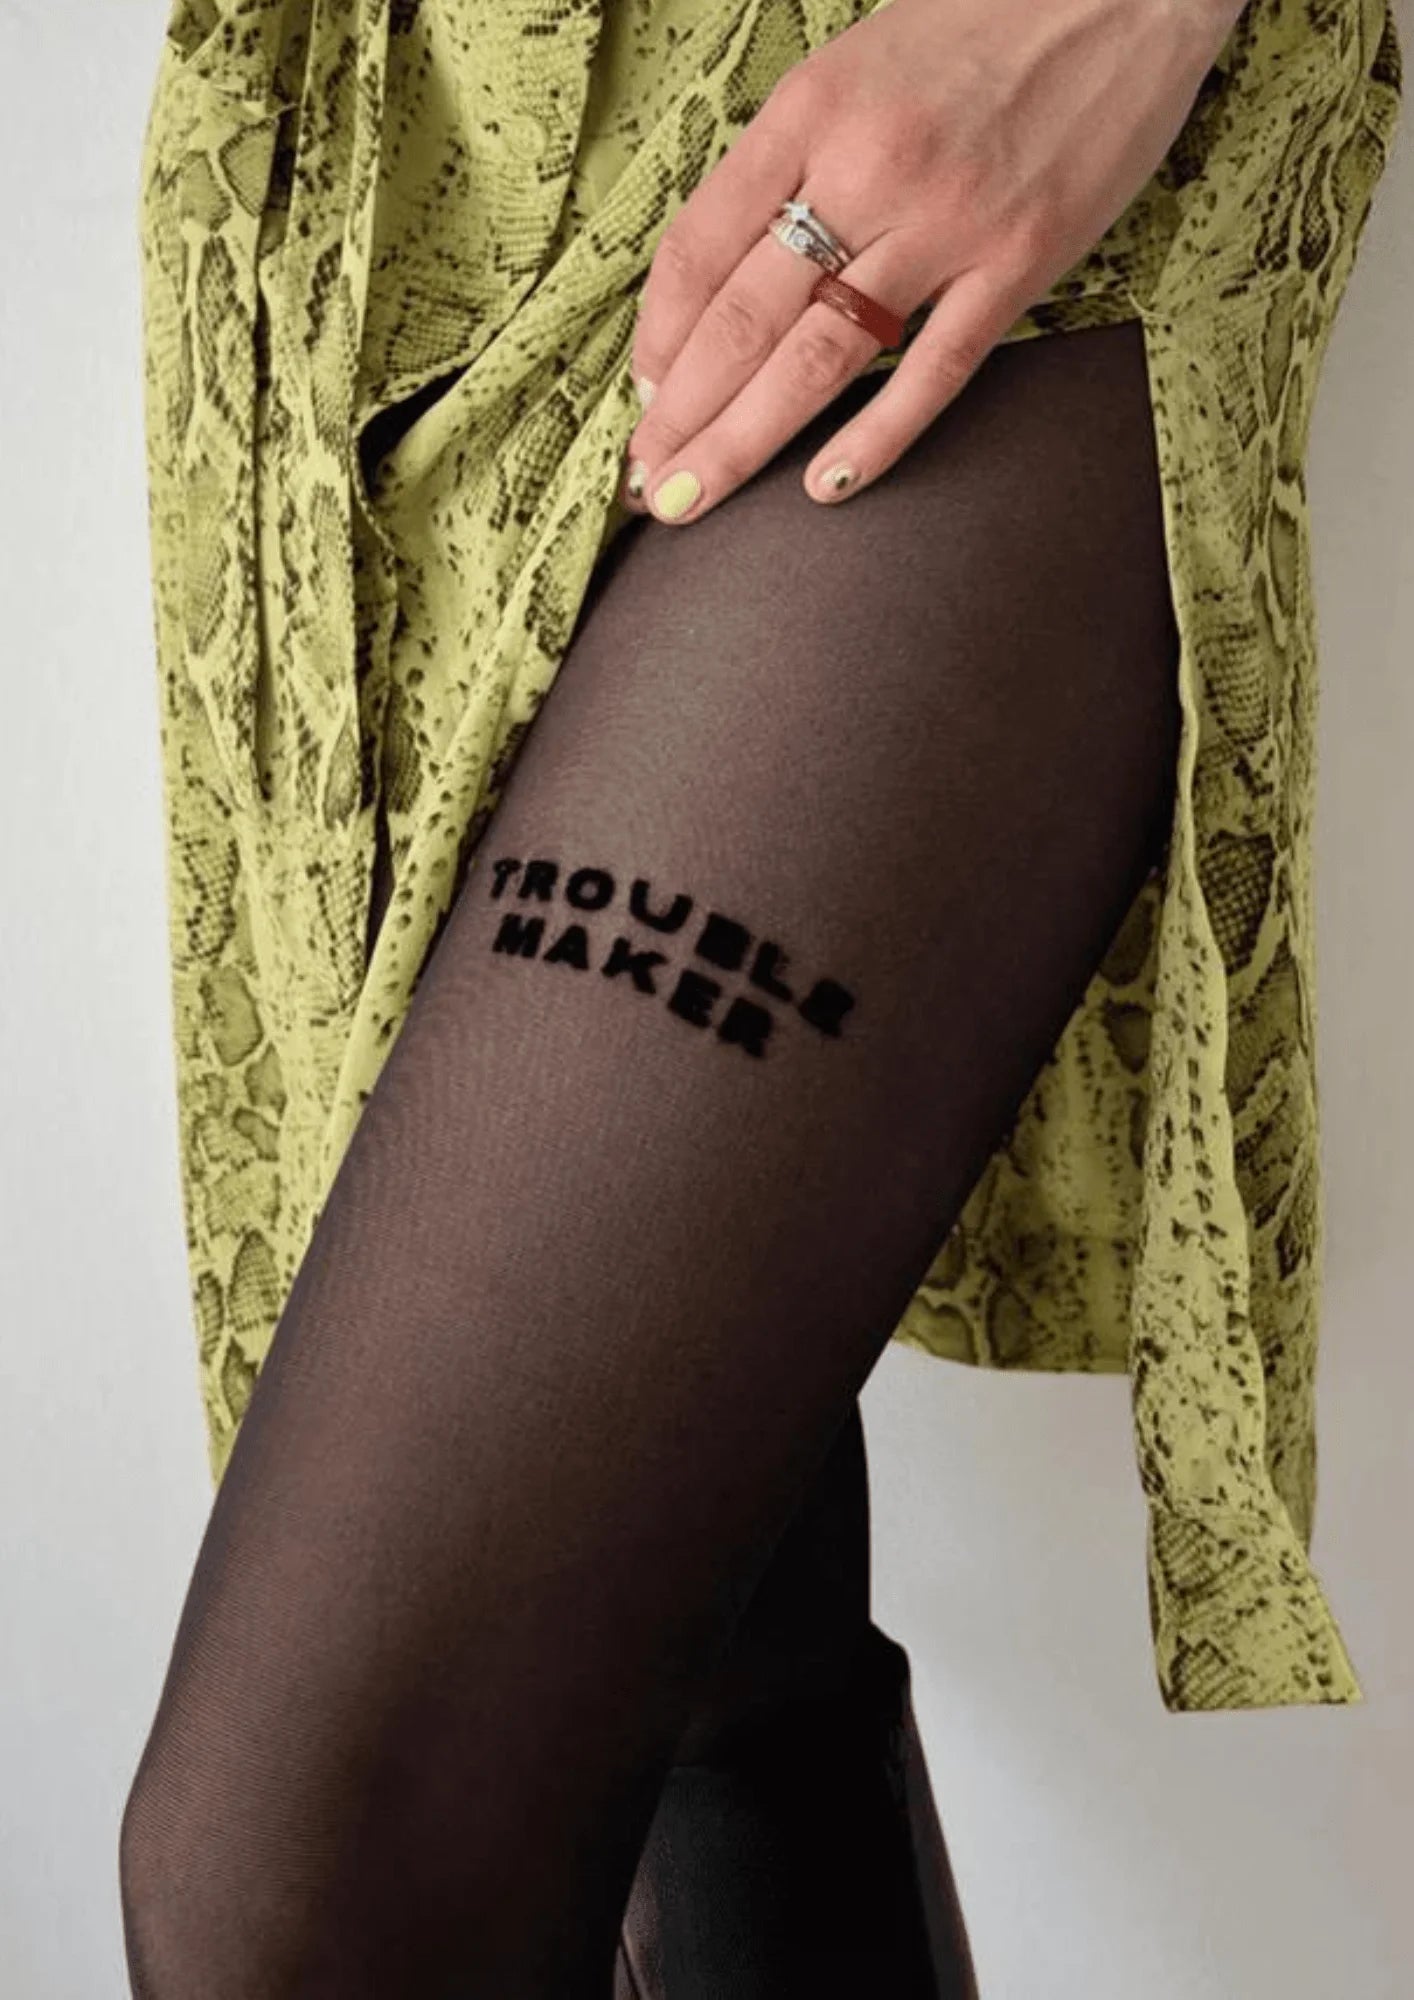 TROUBLEMAKER TIGHTS